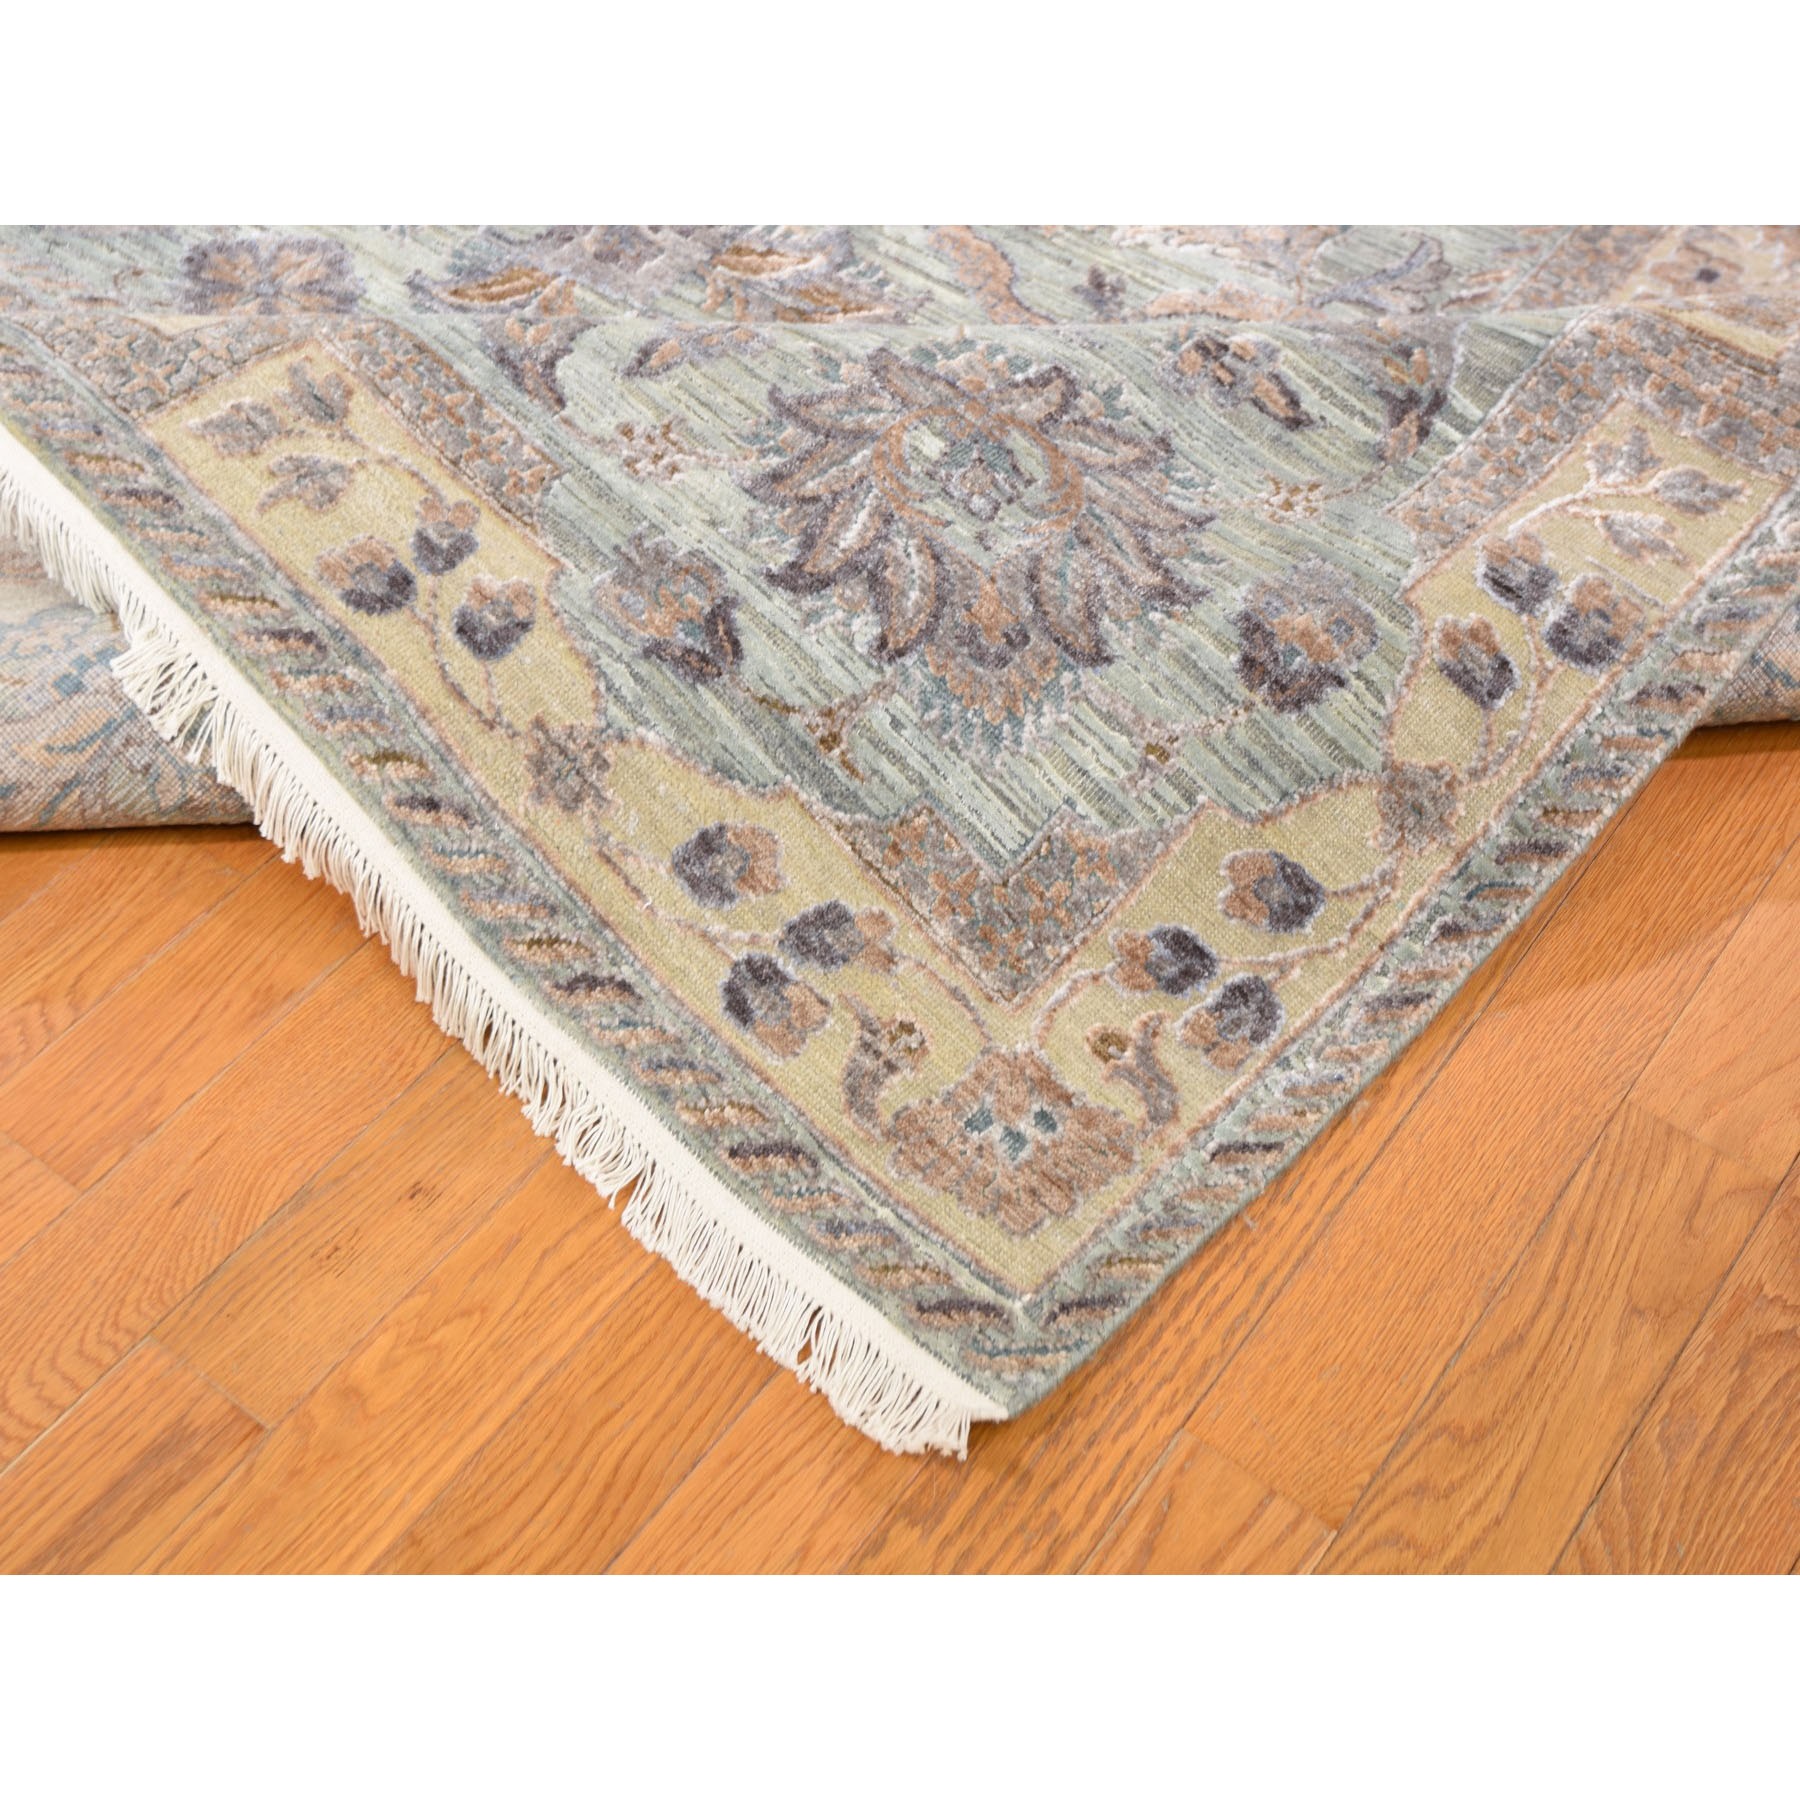 11'8"x15'3" Oversized Light Green Pure Silk With Textured Wool Mughal Design Hand Woven Oriental Rug 